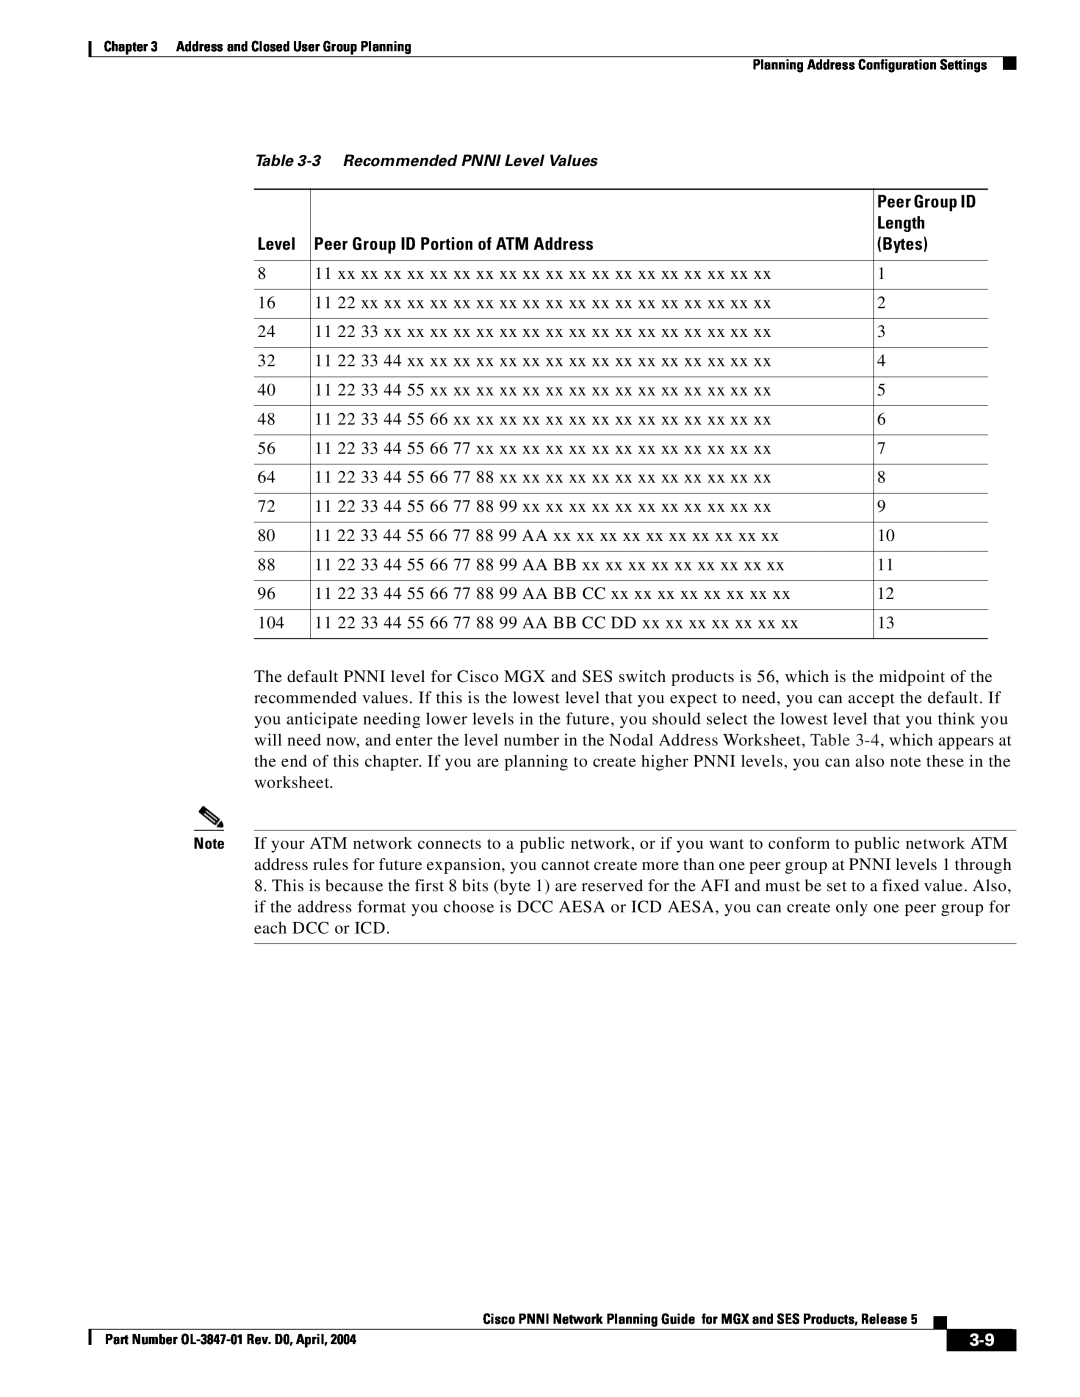 Cisco Systems Network Router manual Length, Level, Peer Group ID Portion of ATM Address, Bytes 